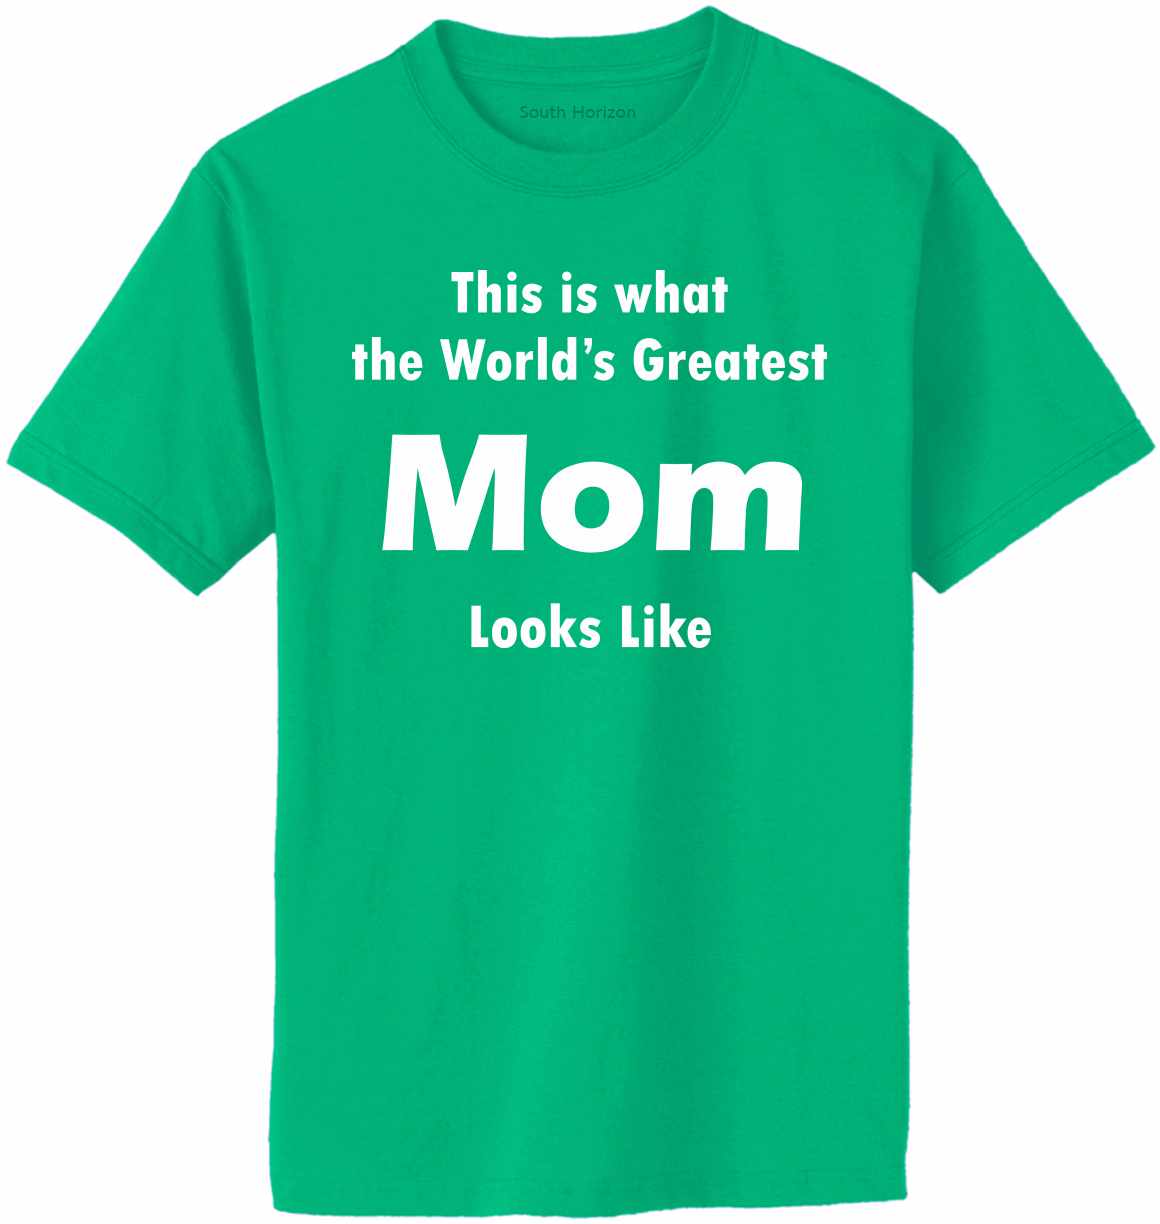 This is what the World's Greatest Mom Looks Like Adult T-Shirt (#762-1)